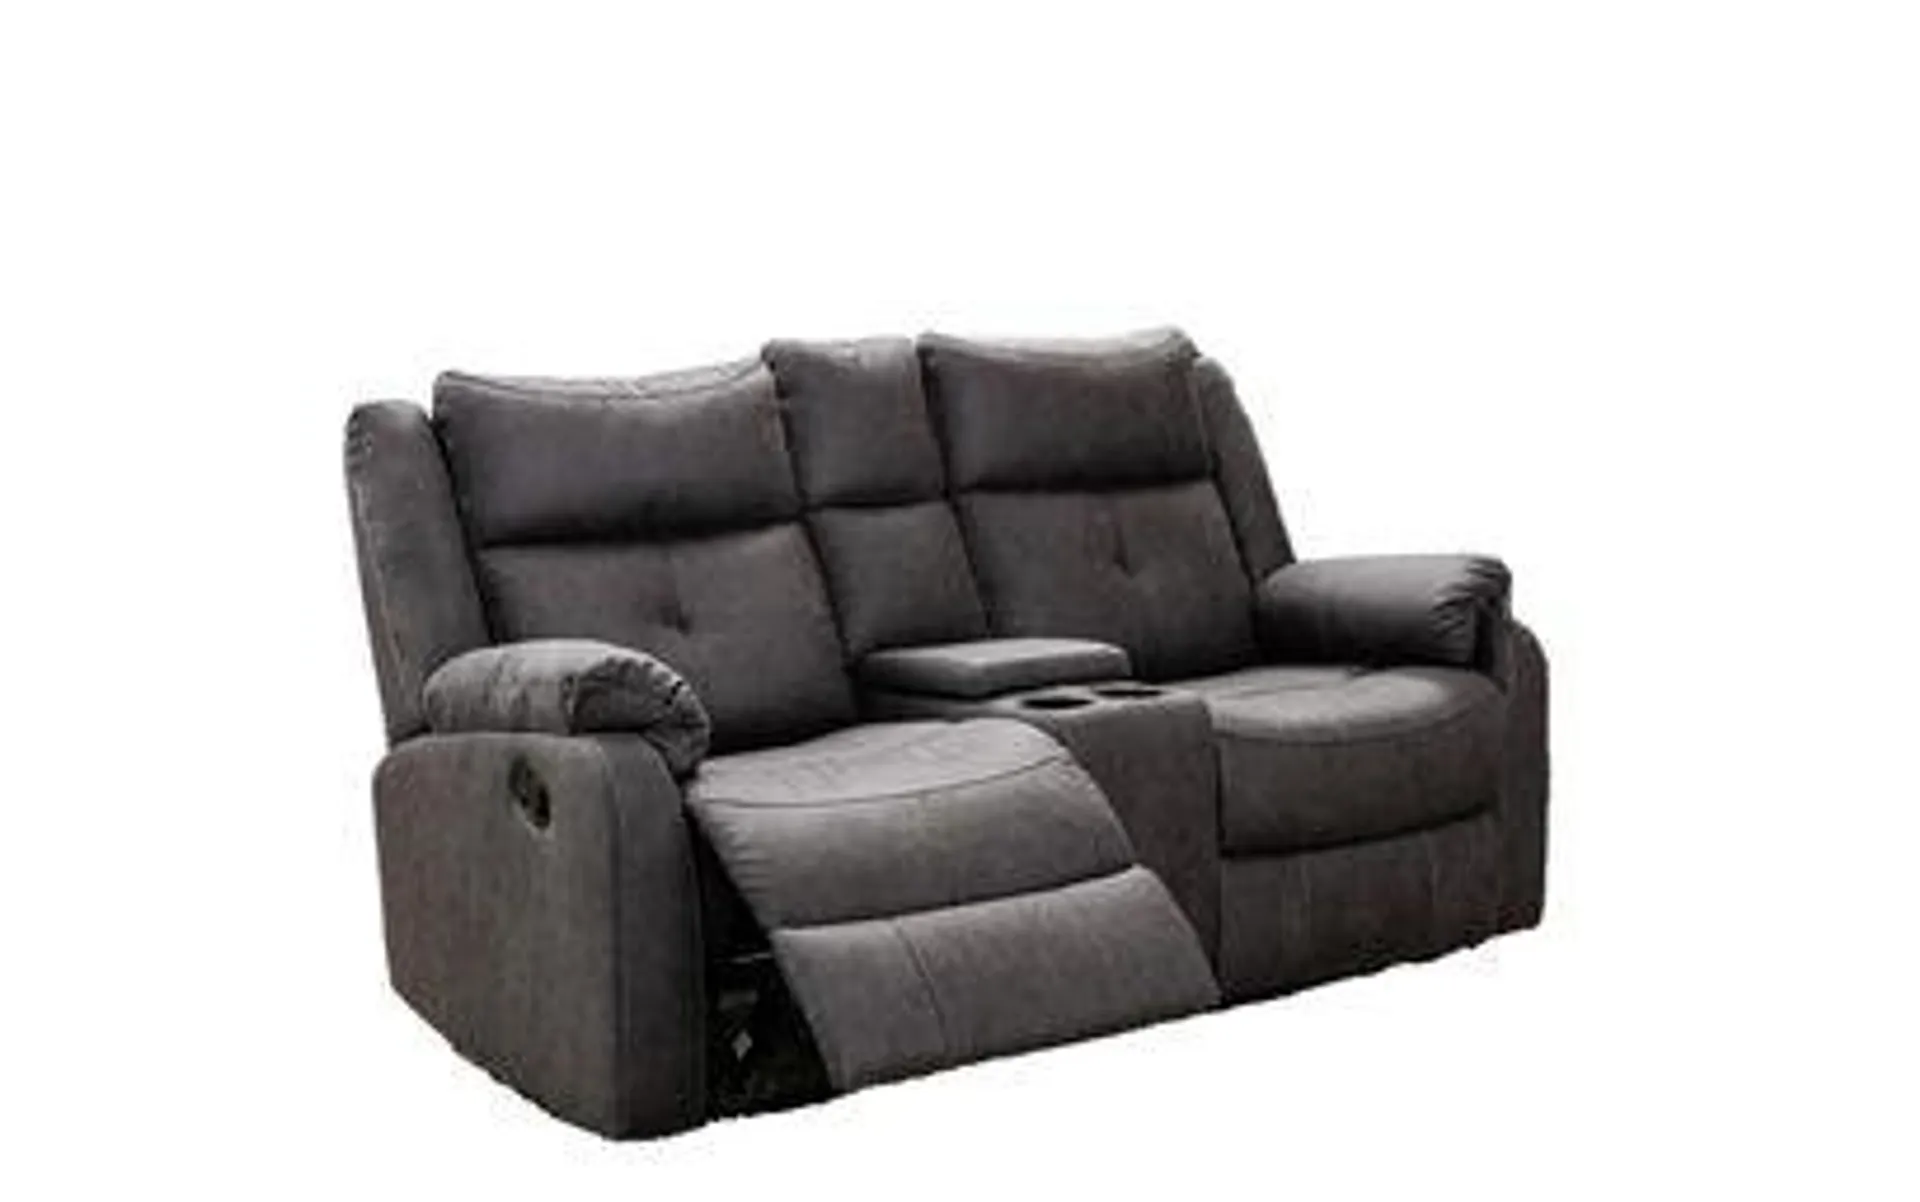 Janus 2 Seater Manual Recliner Sofa with Console